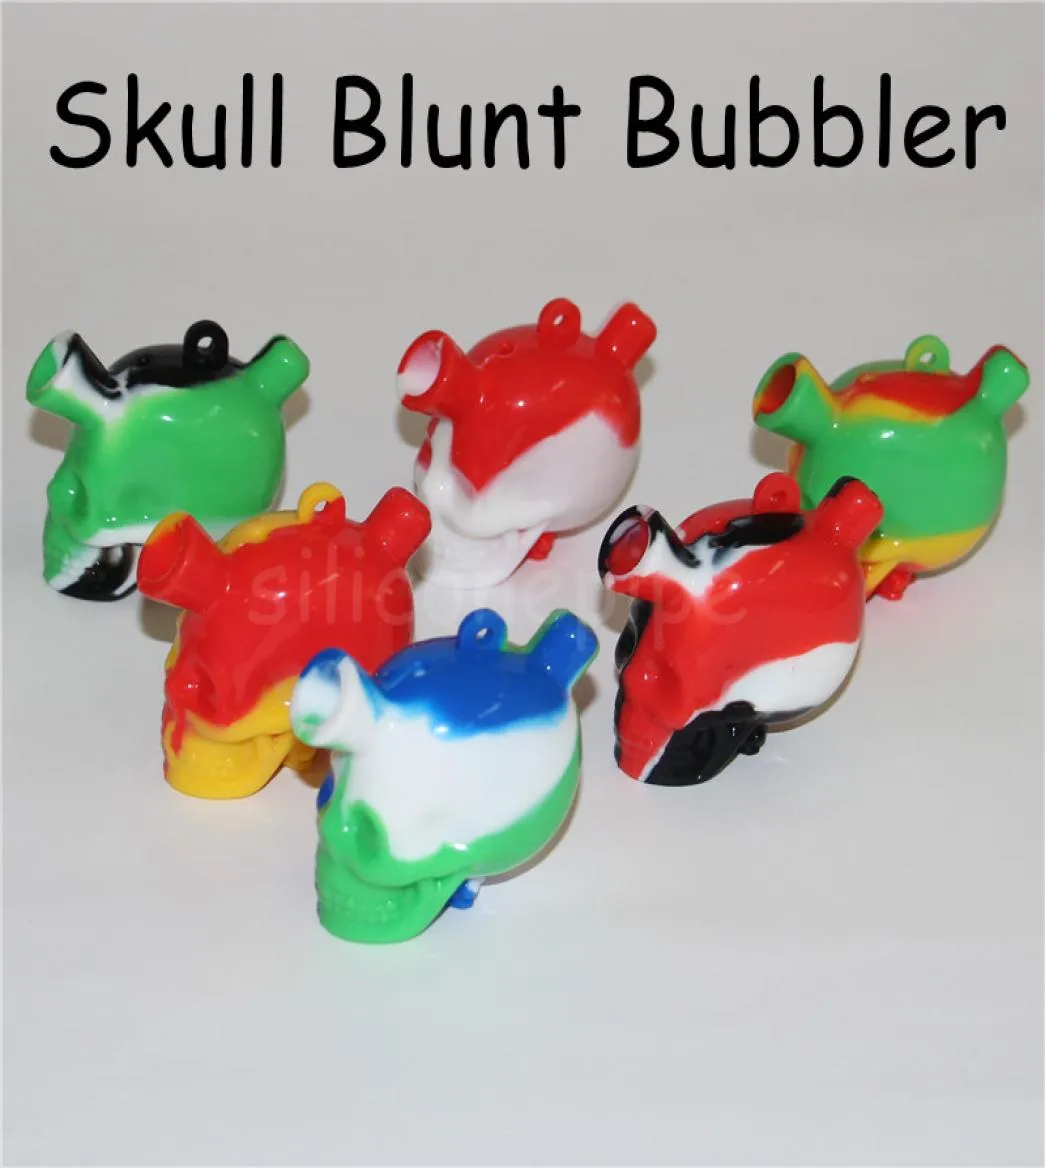 Skull Shape Silicone Travel Bongs Martian Skull Silicone Blunt Bunbbler Joint Fumer Bubble Small Water Pipes Small Pipes Han2412701